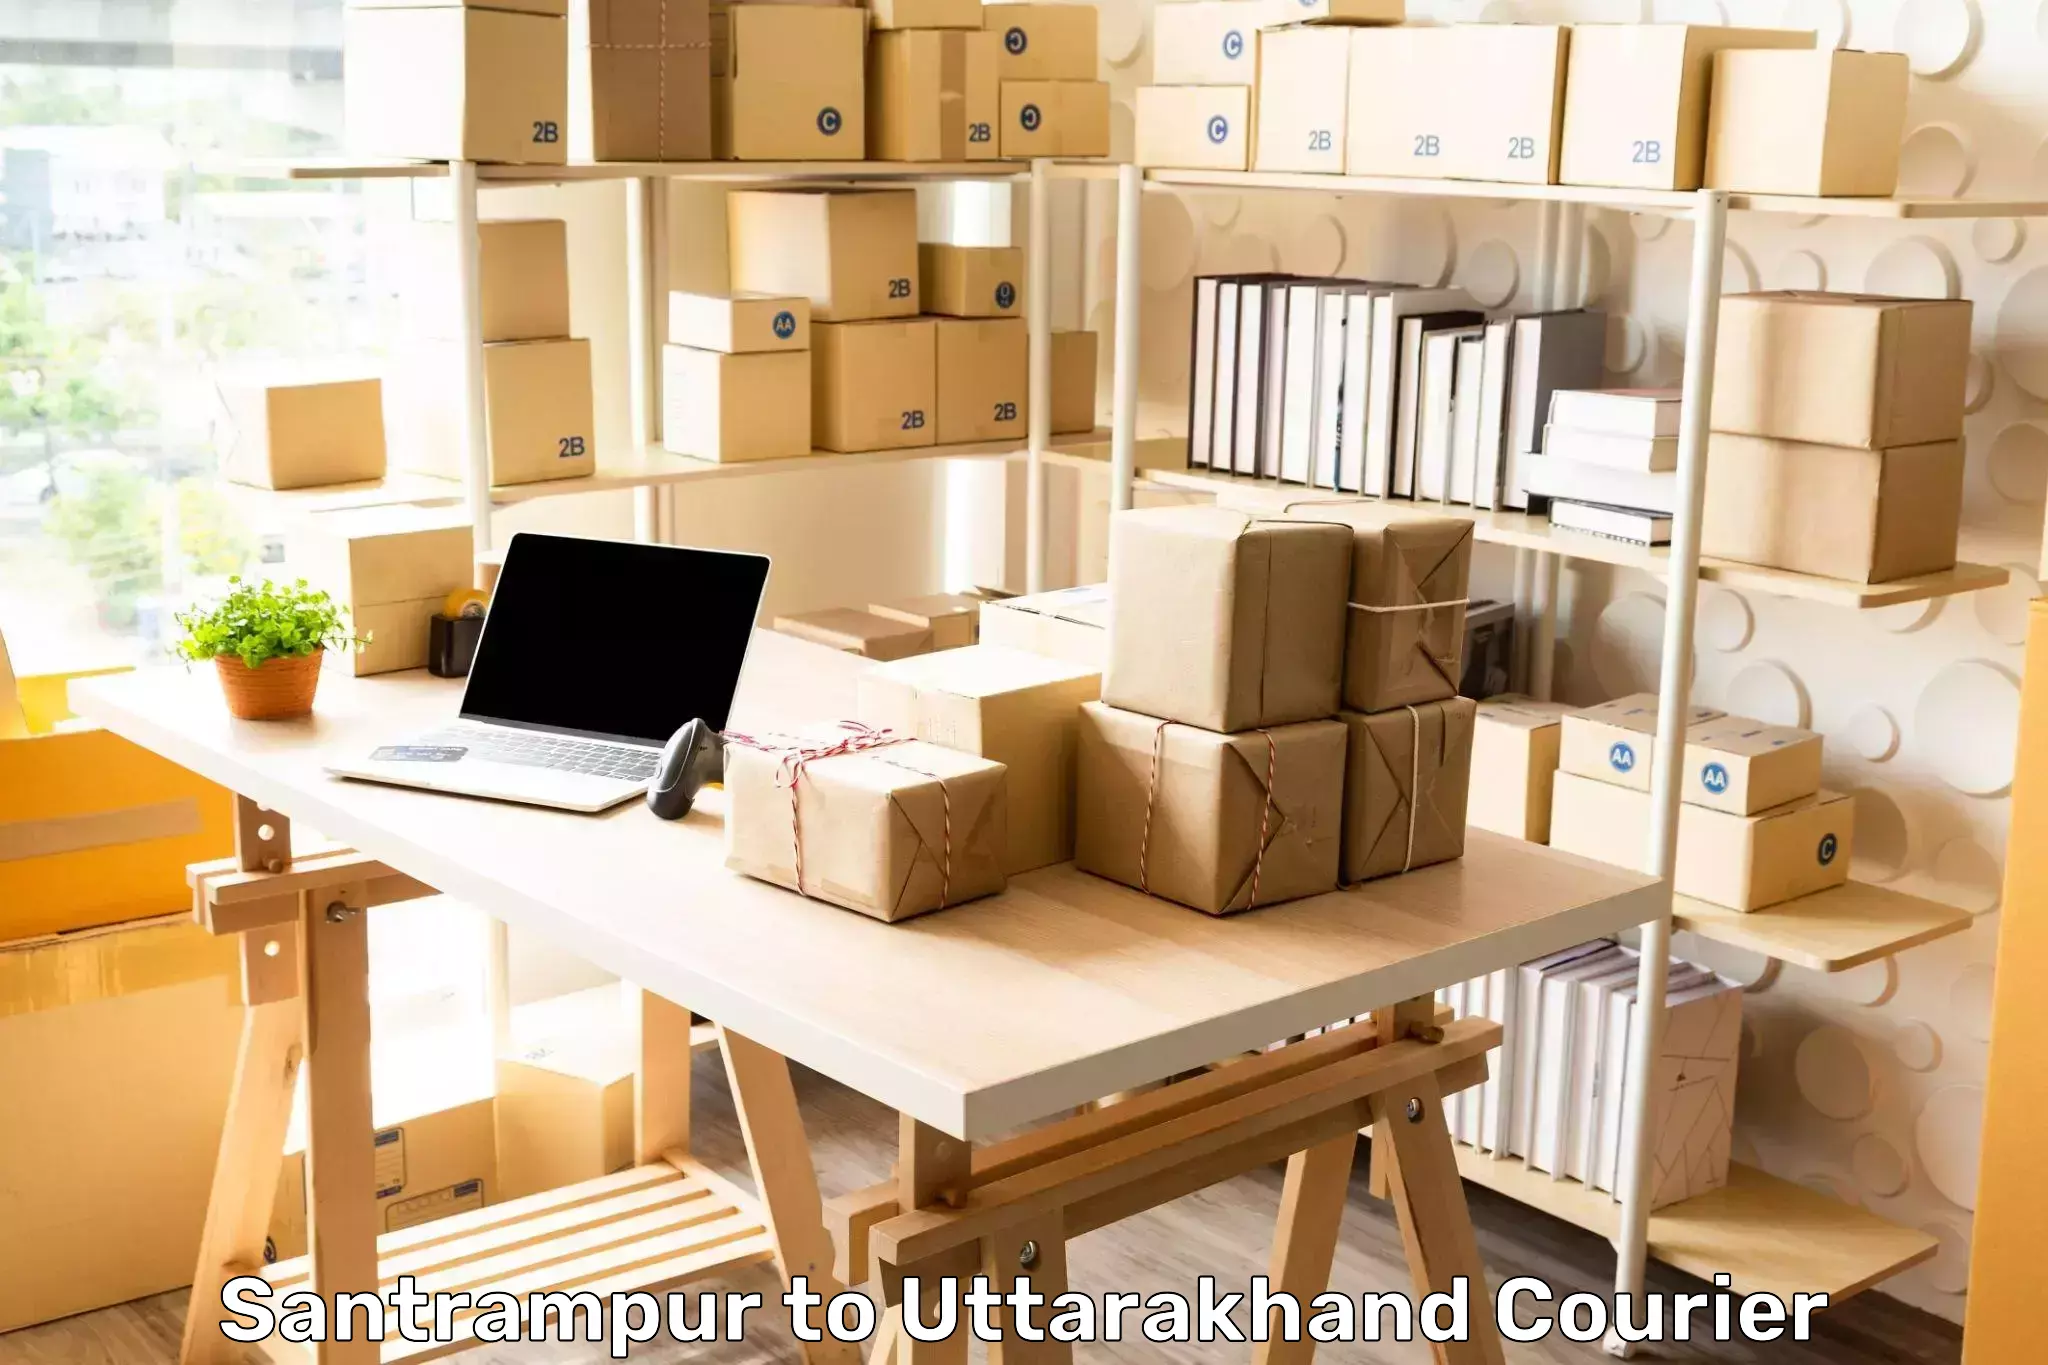 Personalized courier experiences Santrampur to Uttarakhand